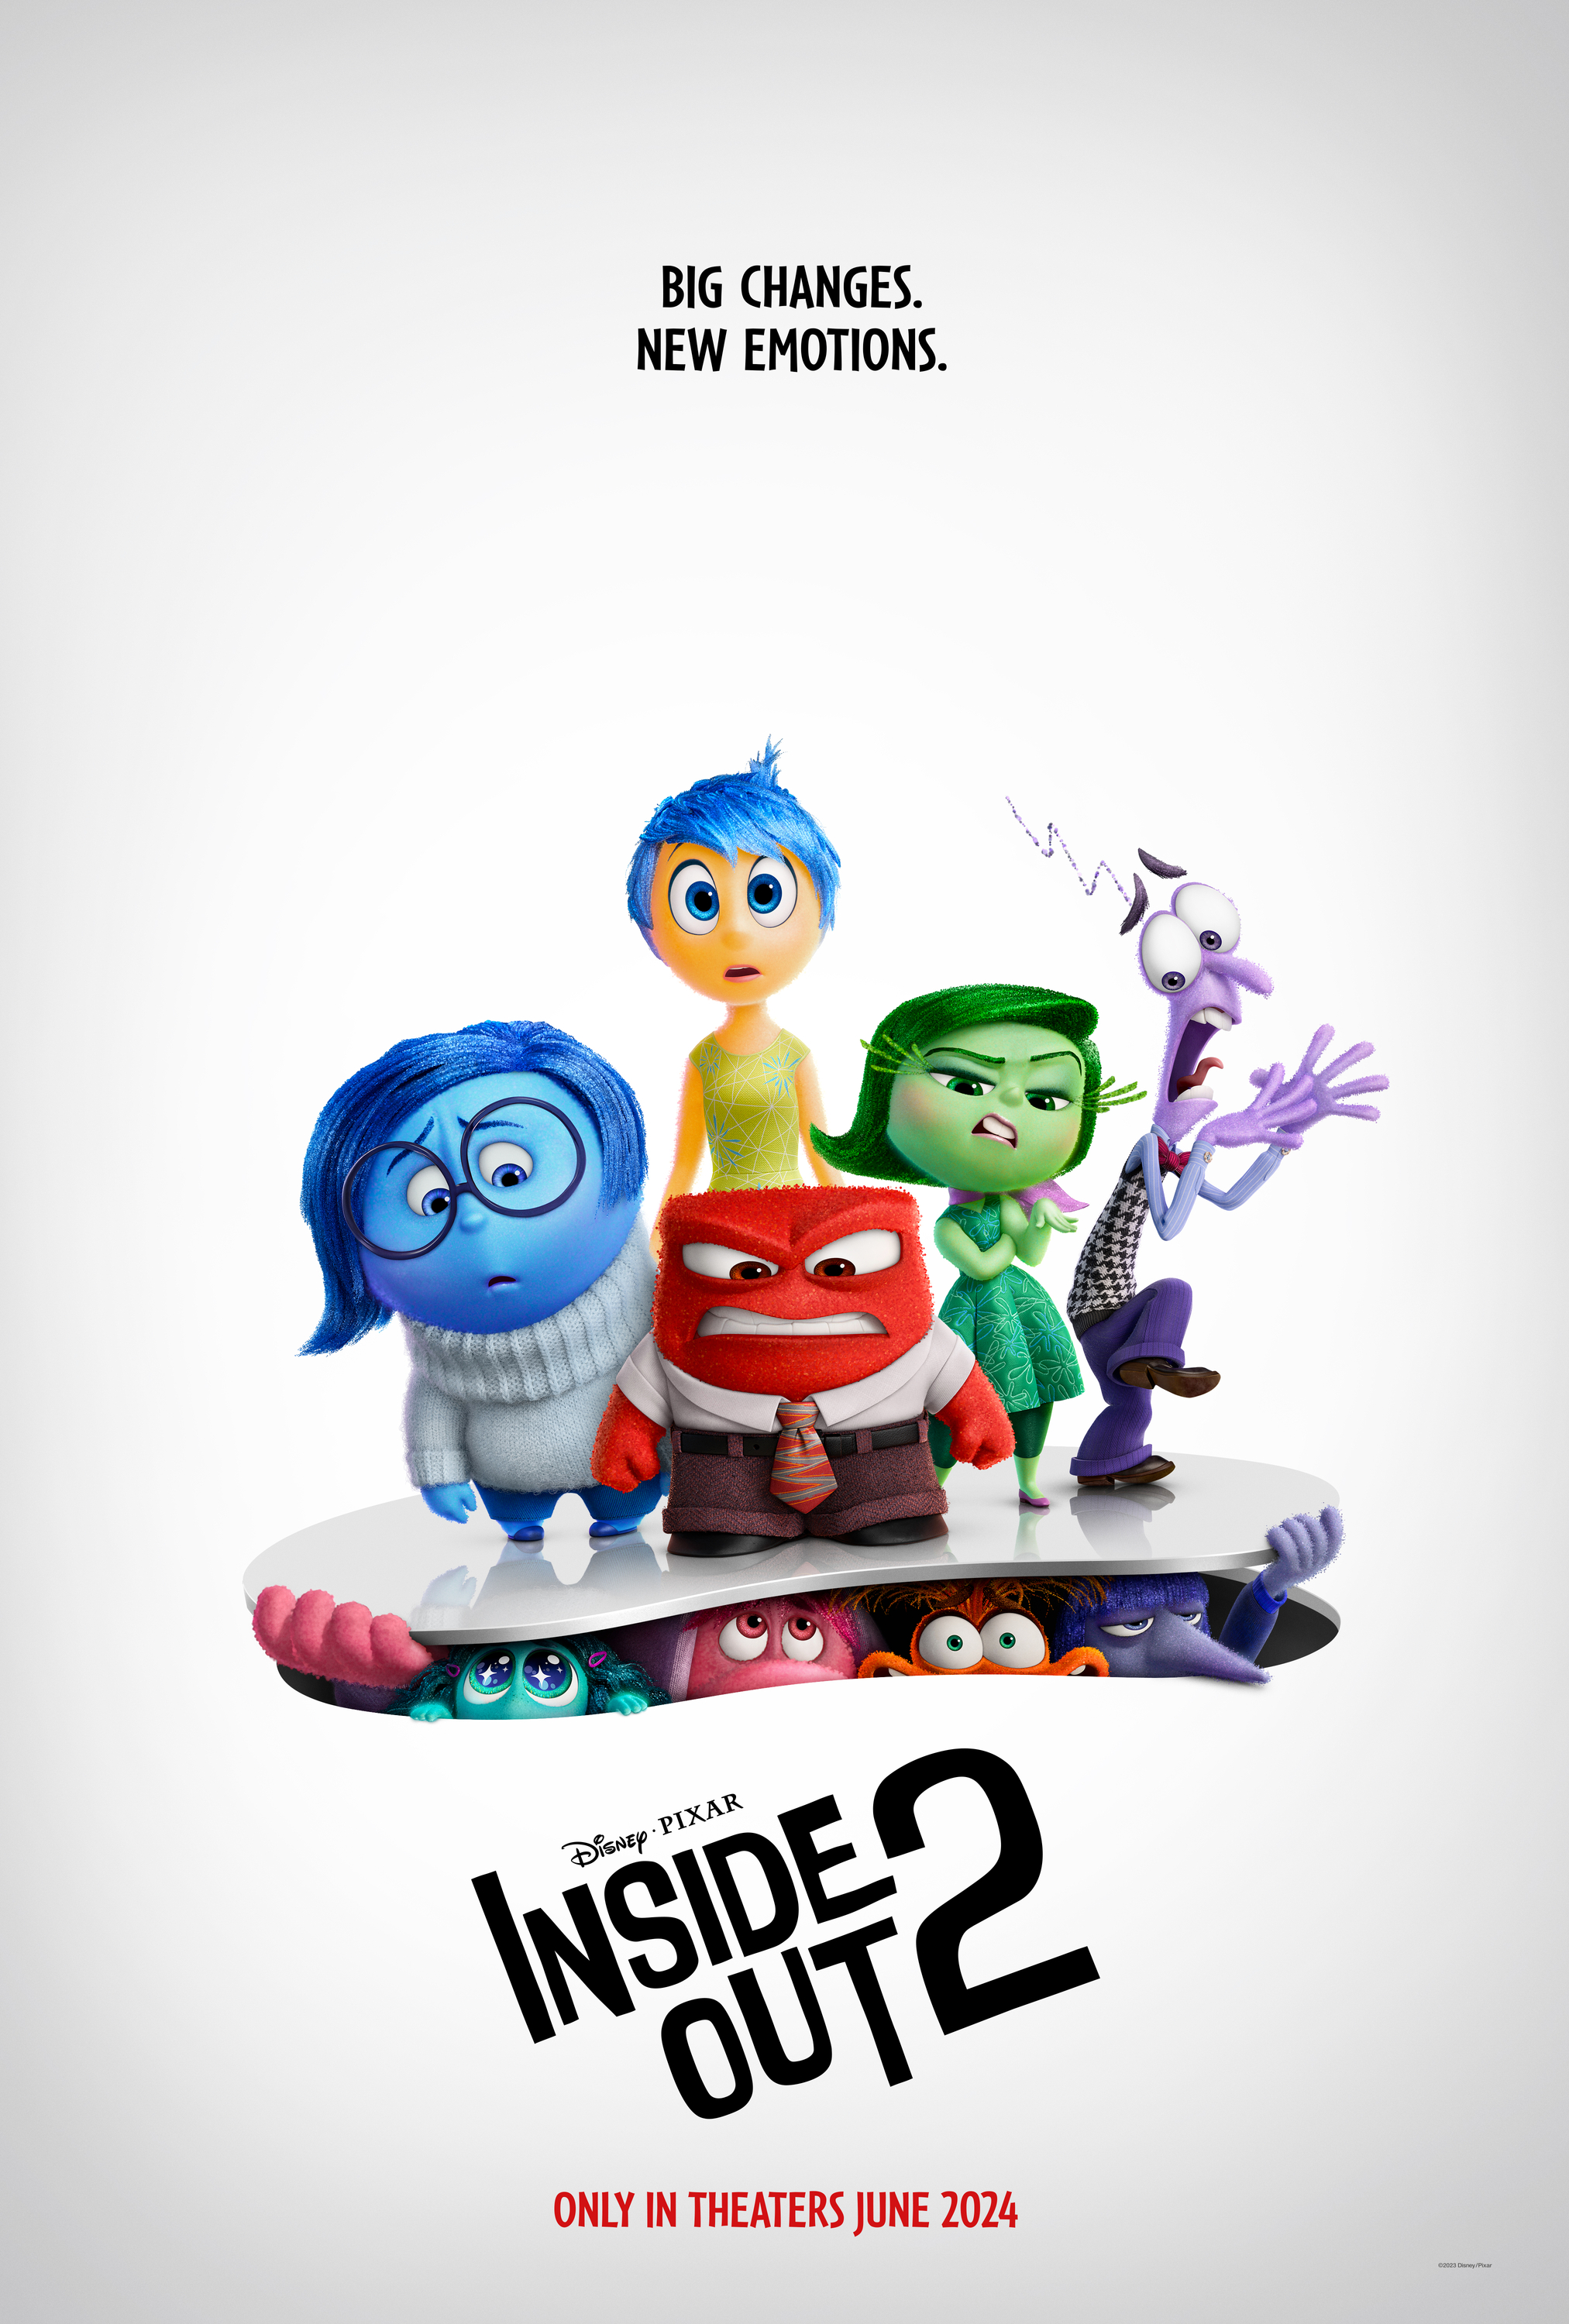 https://static.wikia.nocookie.net/disney/images/7/7e/Inside_Out_2_-_Teaser_Poster.jpg/revision/latest?cb=20231109192555